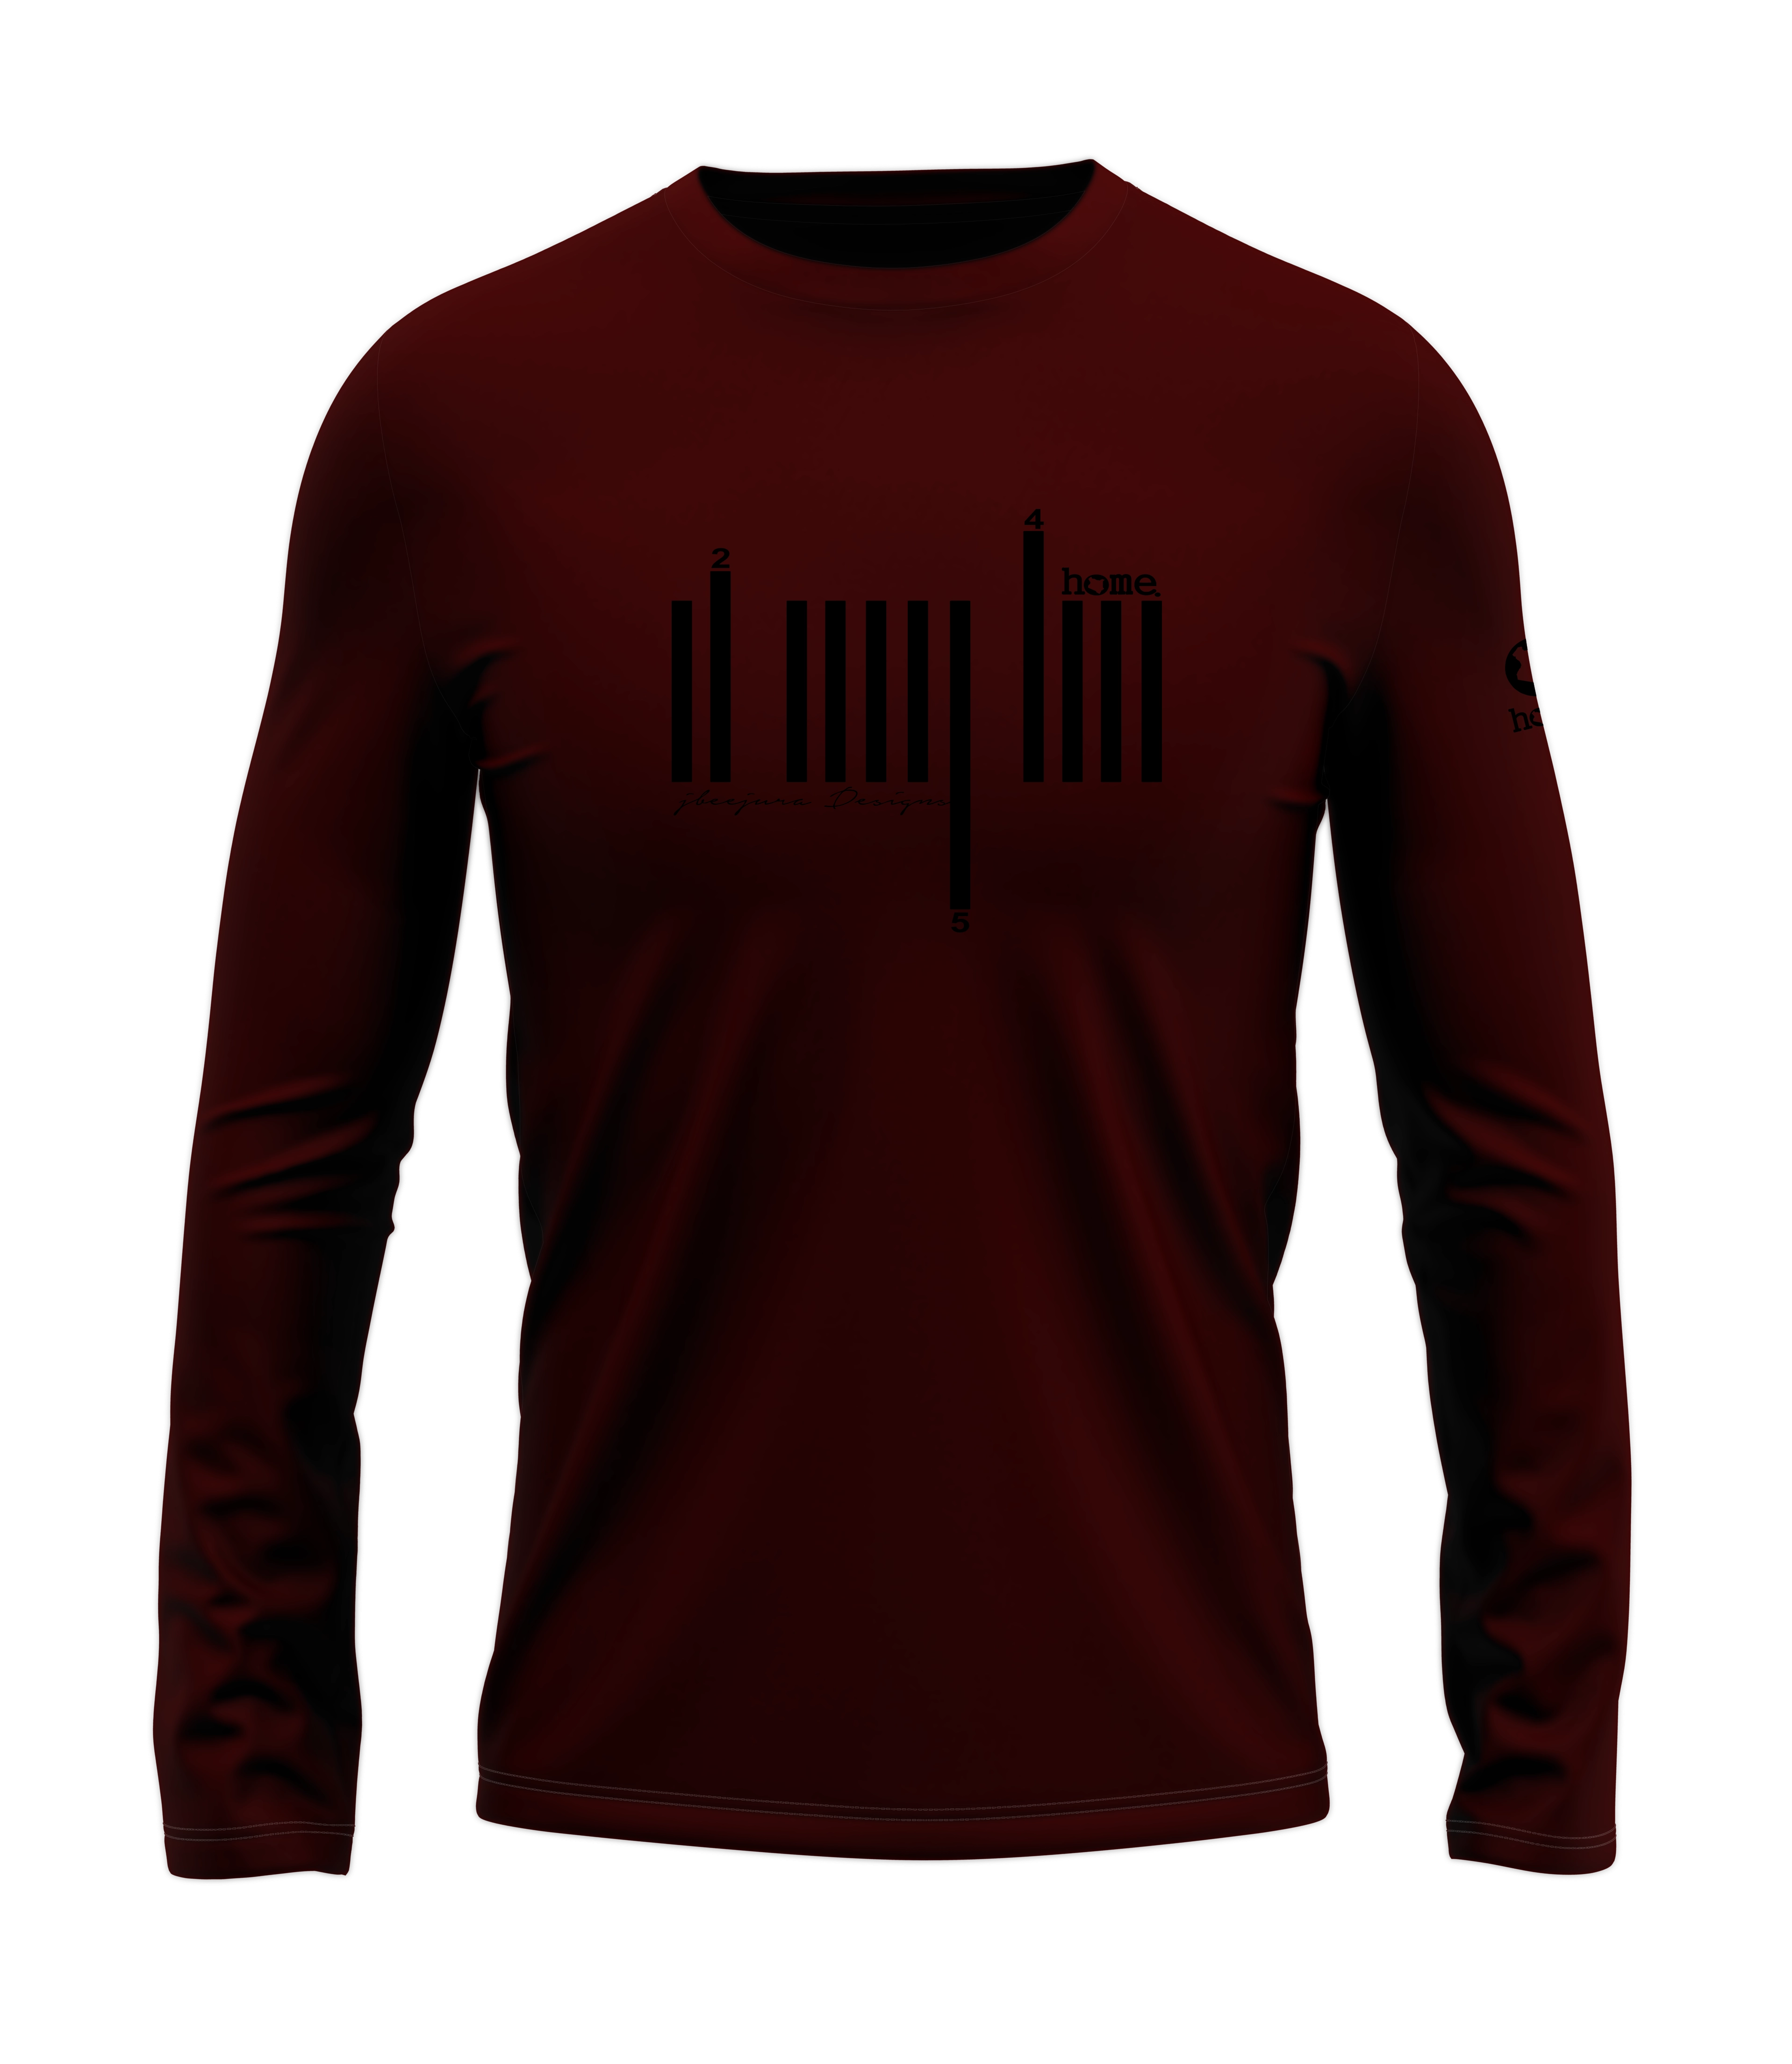 home_254 LONG-SLEEVED MAROON T-SHIRT WITH A BLACK BARS PRINT – COTTON PLUS FABRIC